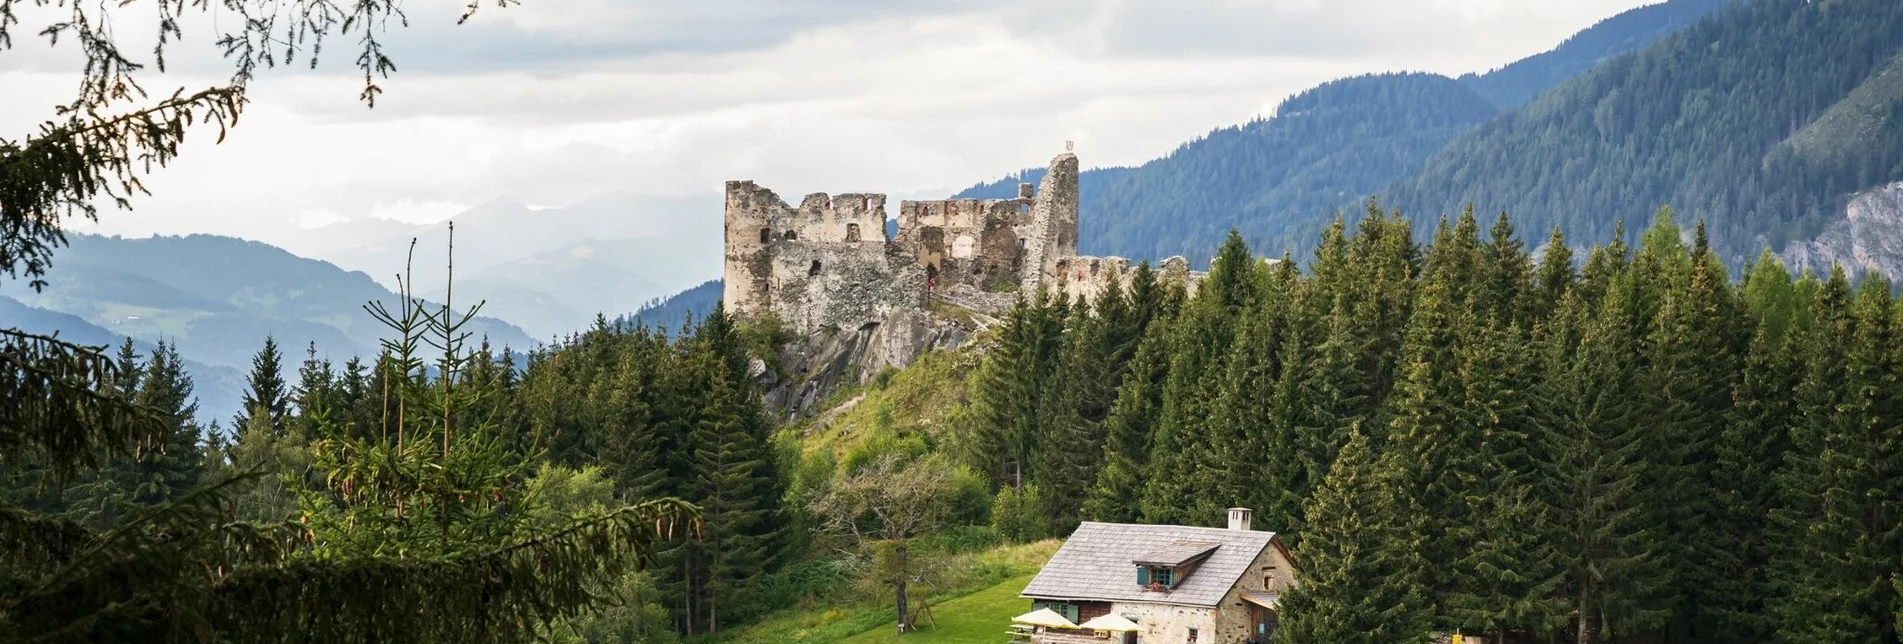 Hiking route From the Sperl Nature Park Farm to the stone castle - Touren-Impression #1 | © Tourismusverband Region Murau